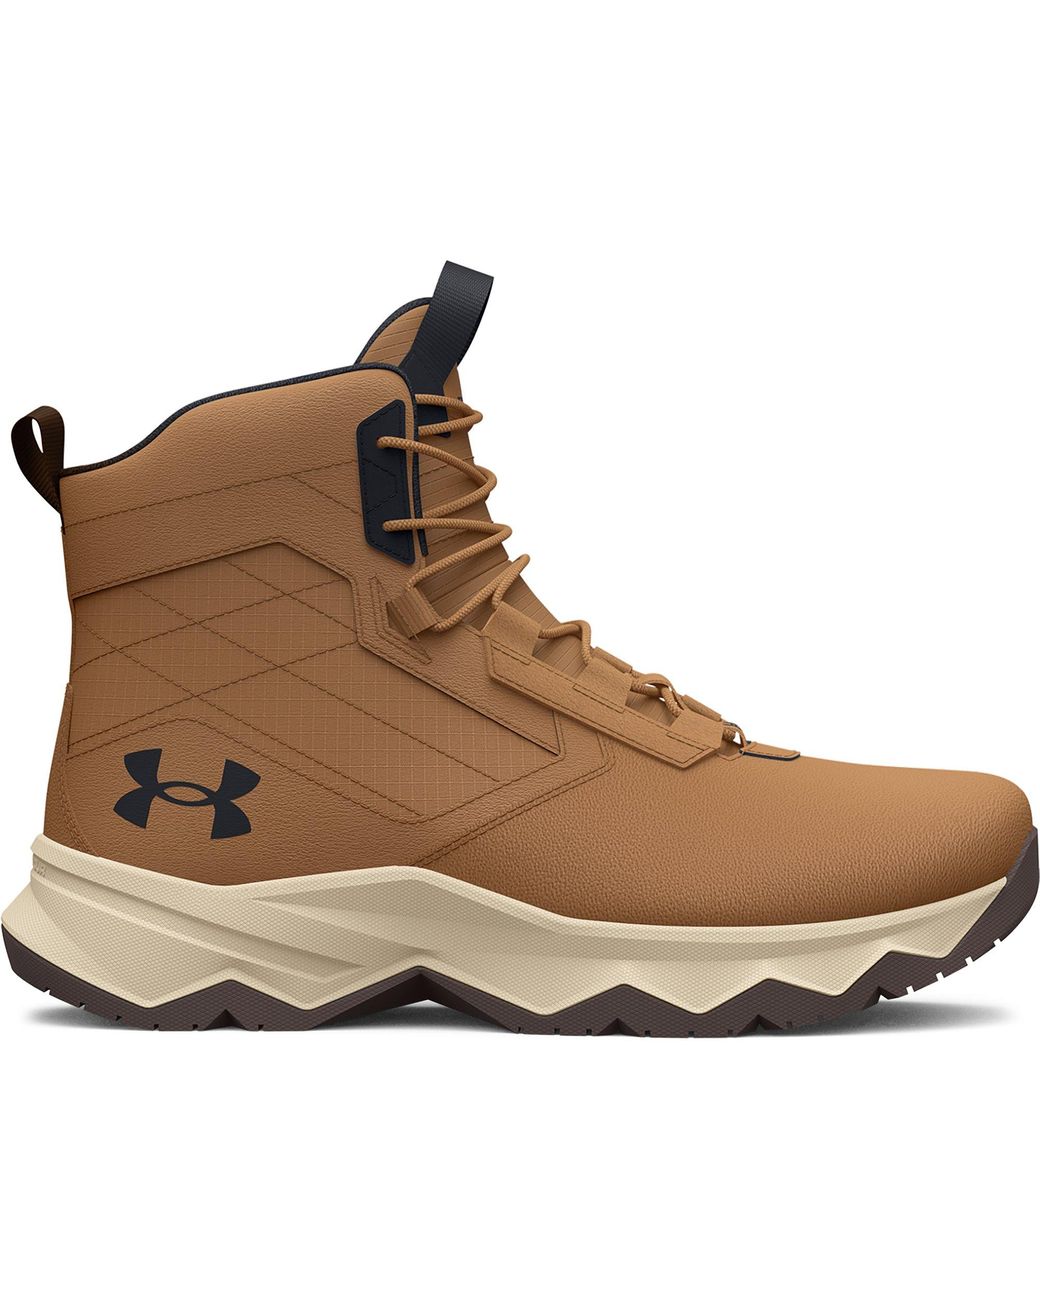 Under Armour Ua Stellar G2 6 Tactical Boots in Brown for Men